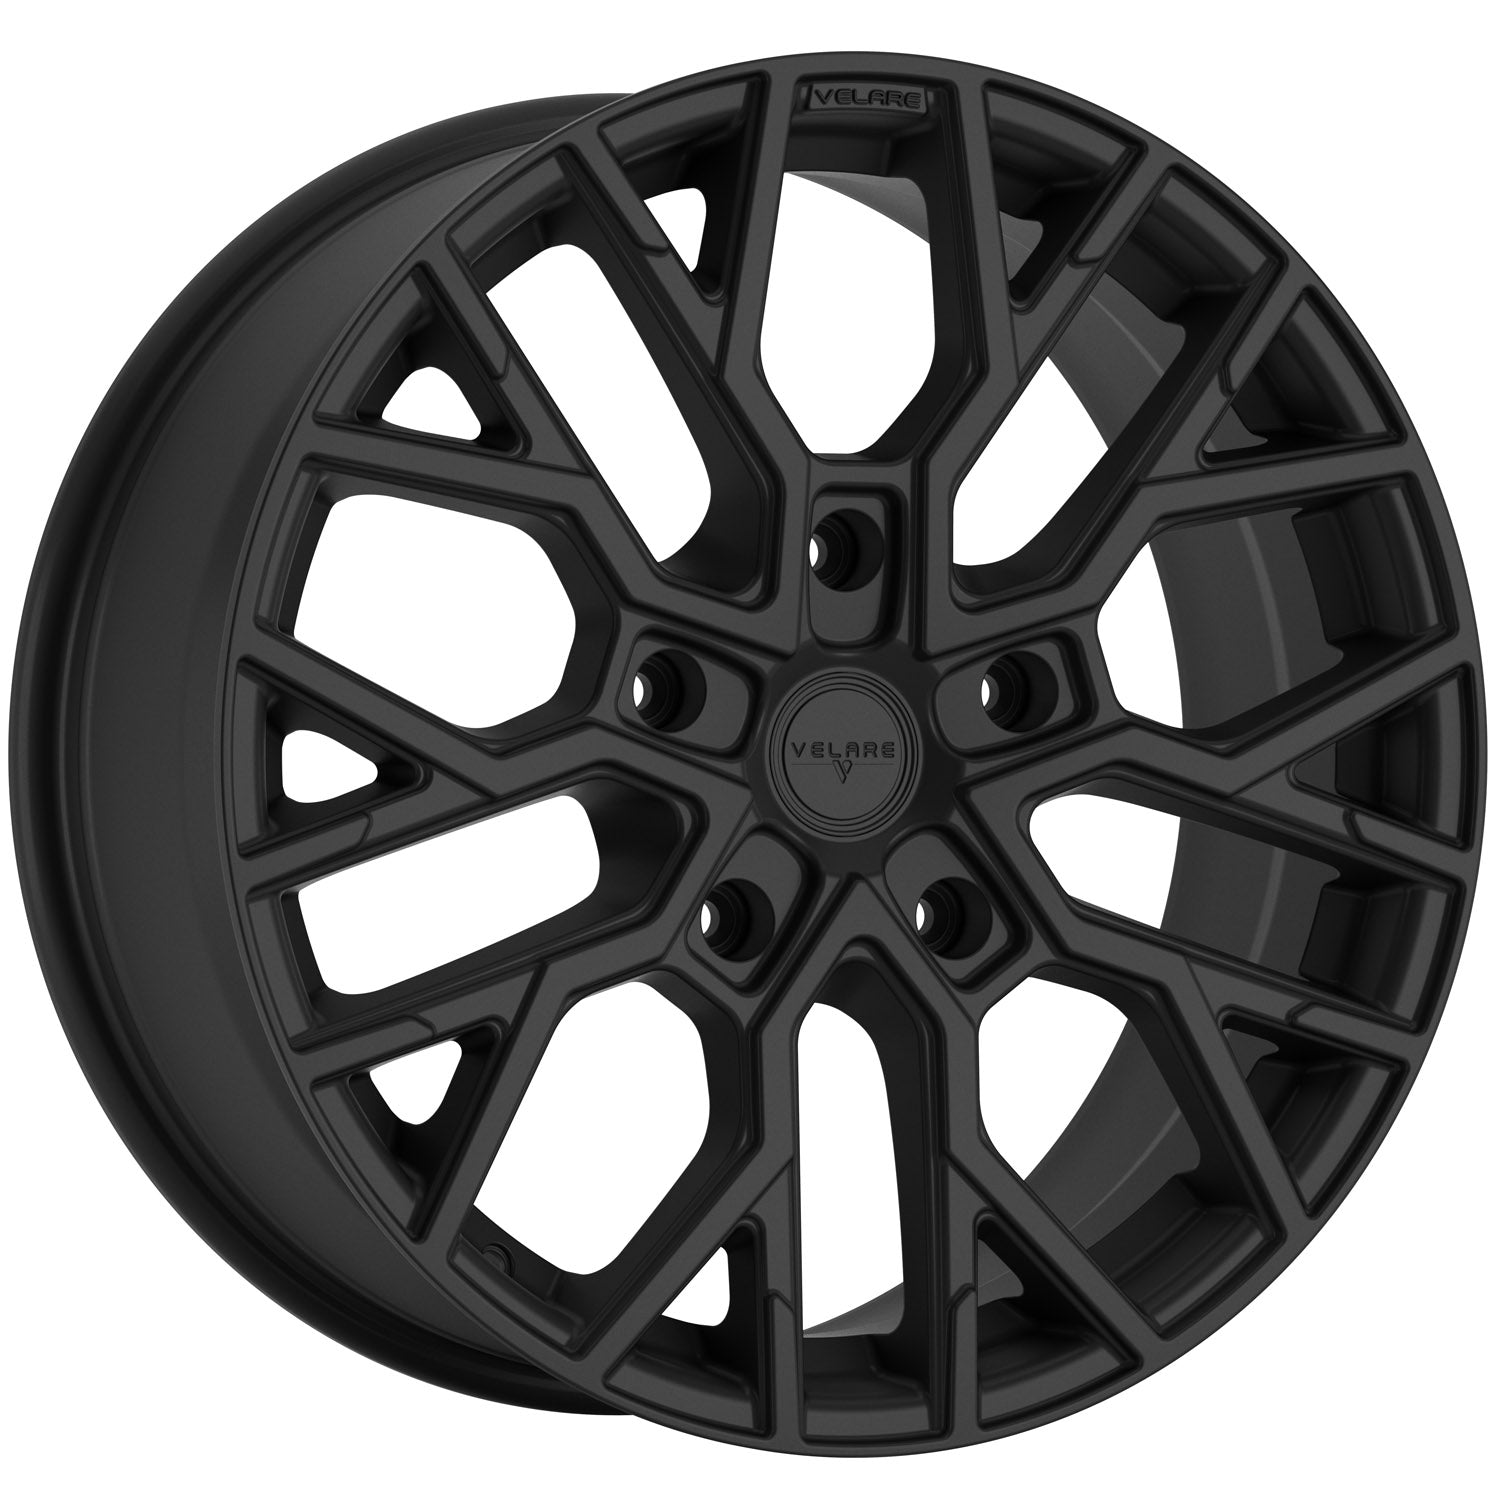 VLR-T Wheel and Tyre Package-Motor Vehicle Rims & Wheels-Velare- DC Leisure